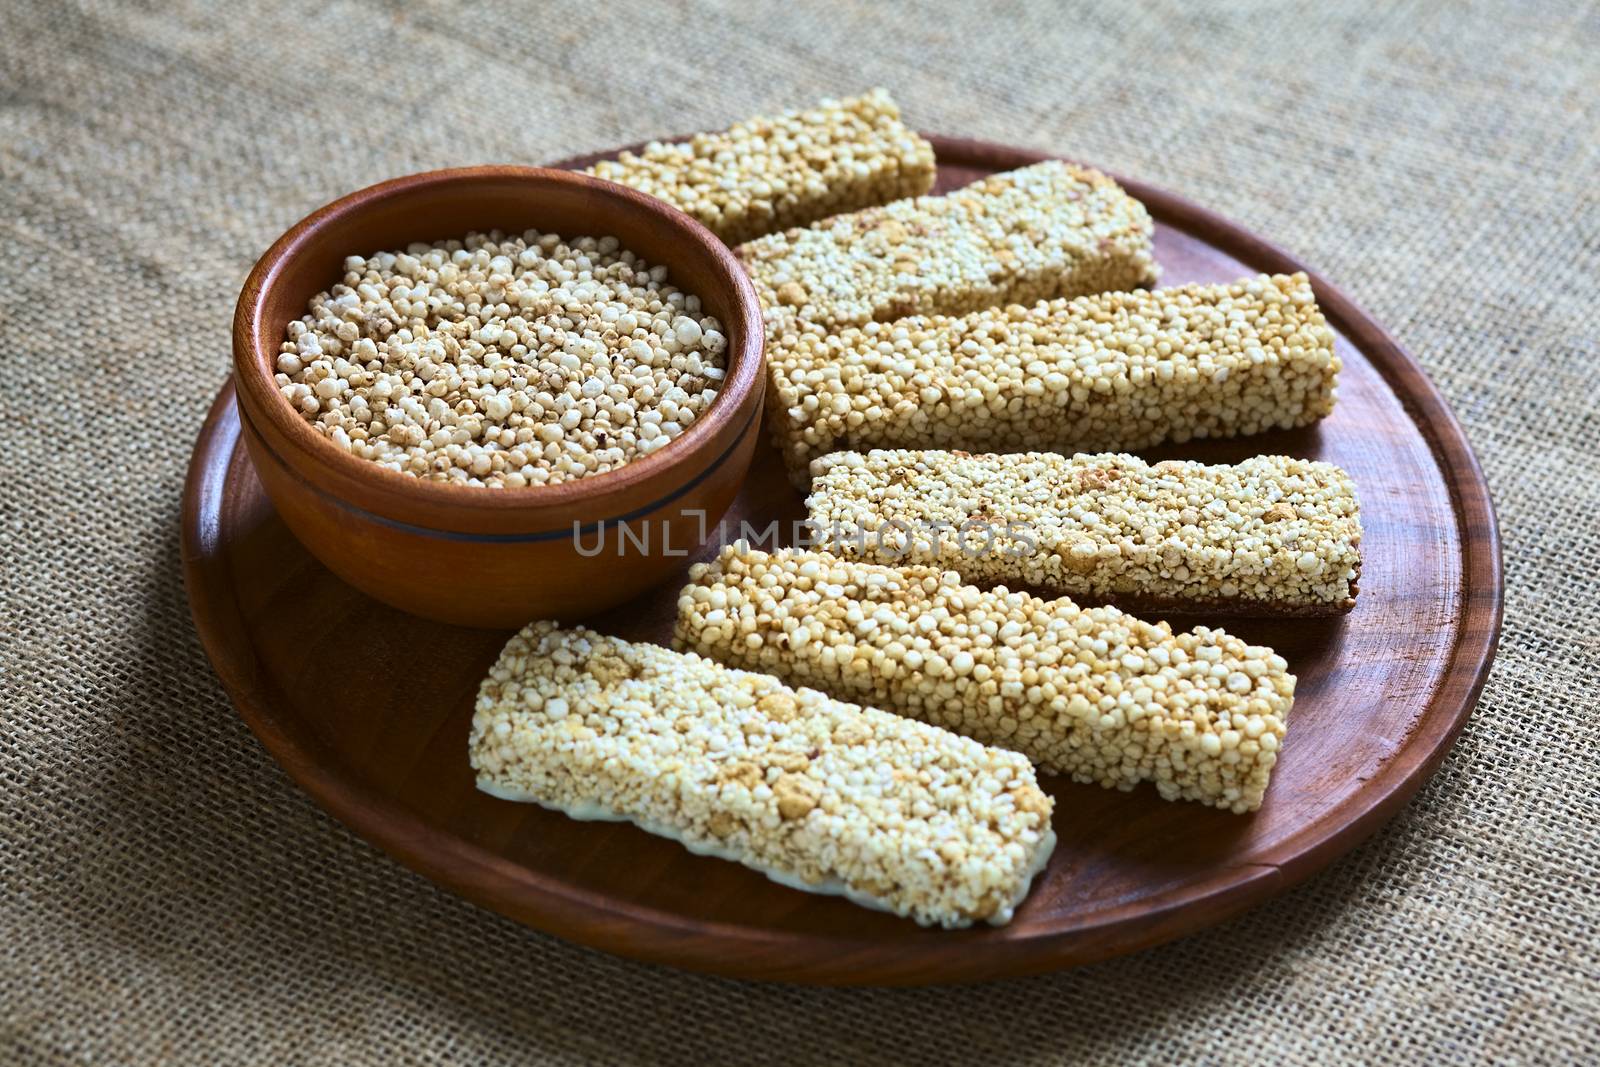 Popped quinoa seeds in bowl with quinoa cereal bars, one with honey the other mixed with amaranth, on wooden plate photographed with natural light (Selective Focus, Focus into the middle of the popped quinoa seeds)